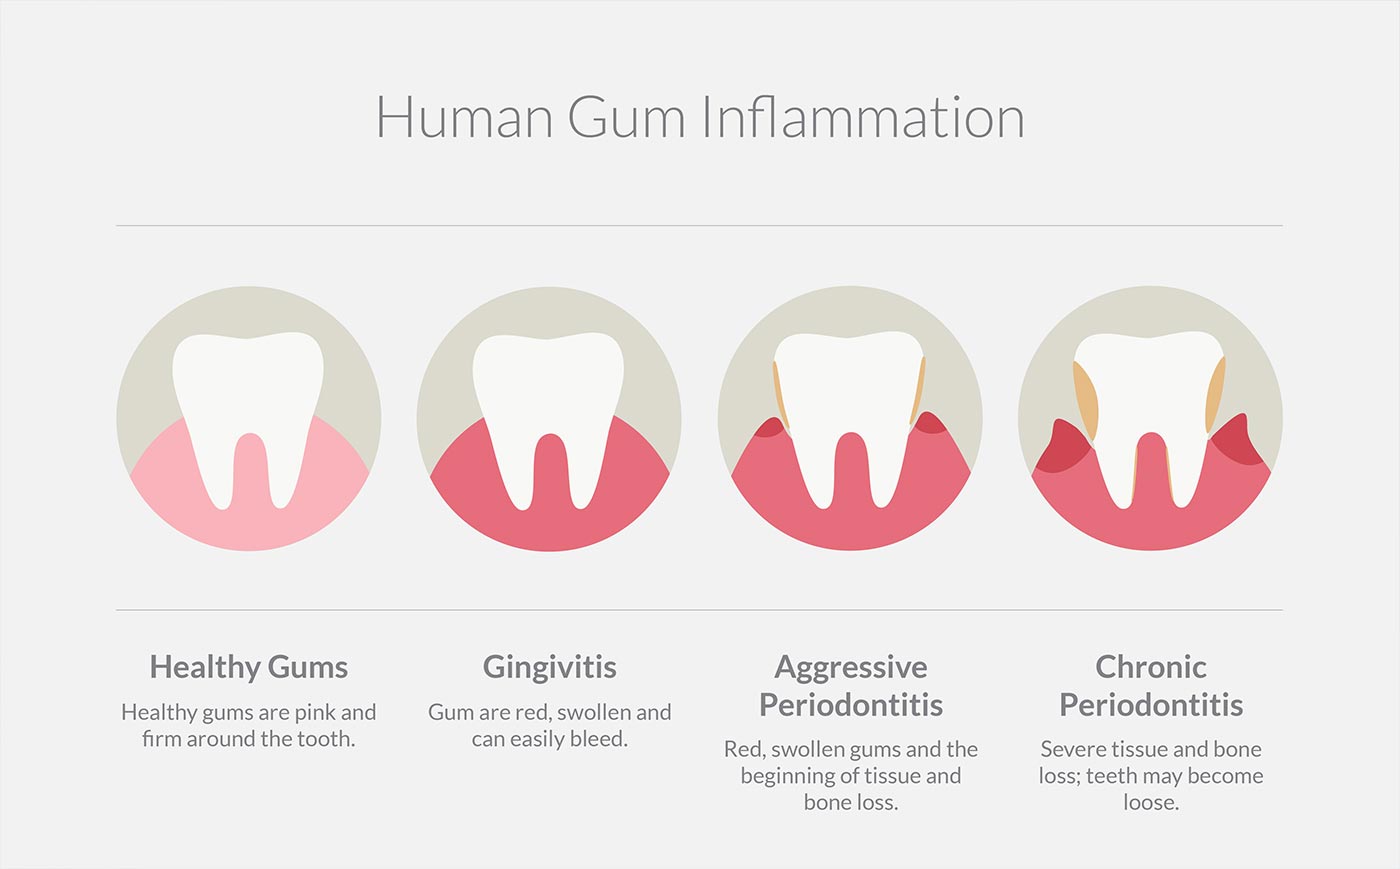 four stages of healthy gums to periodontitis